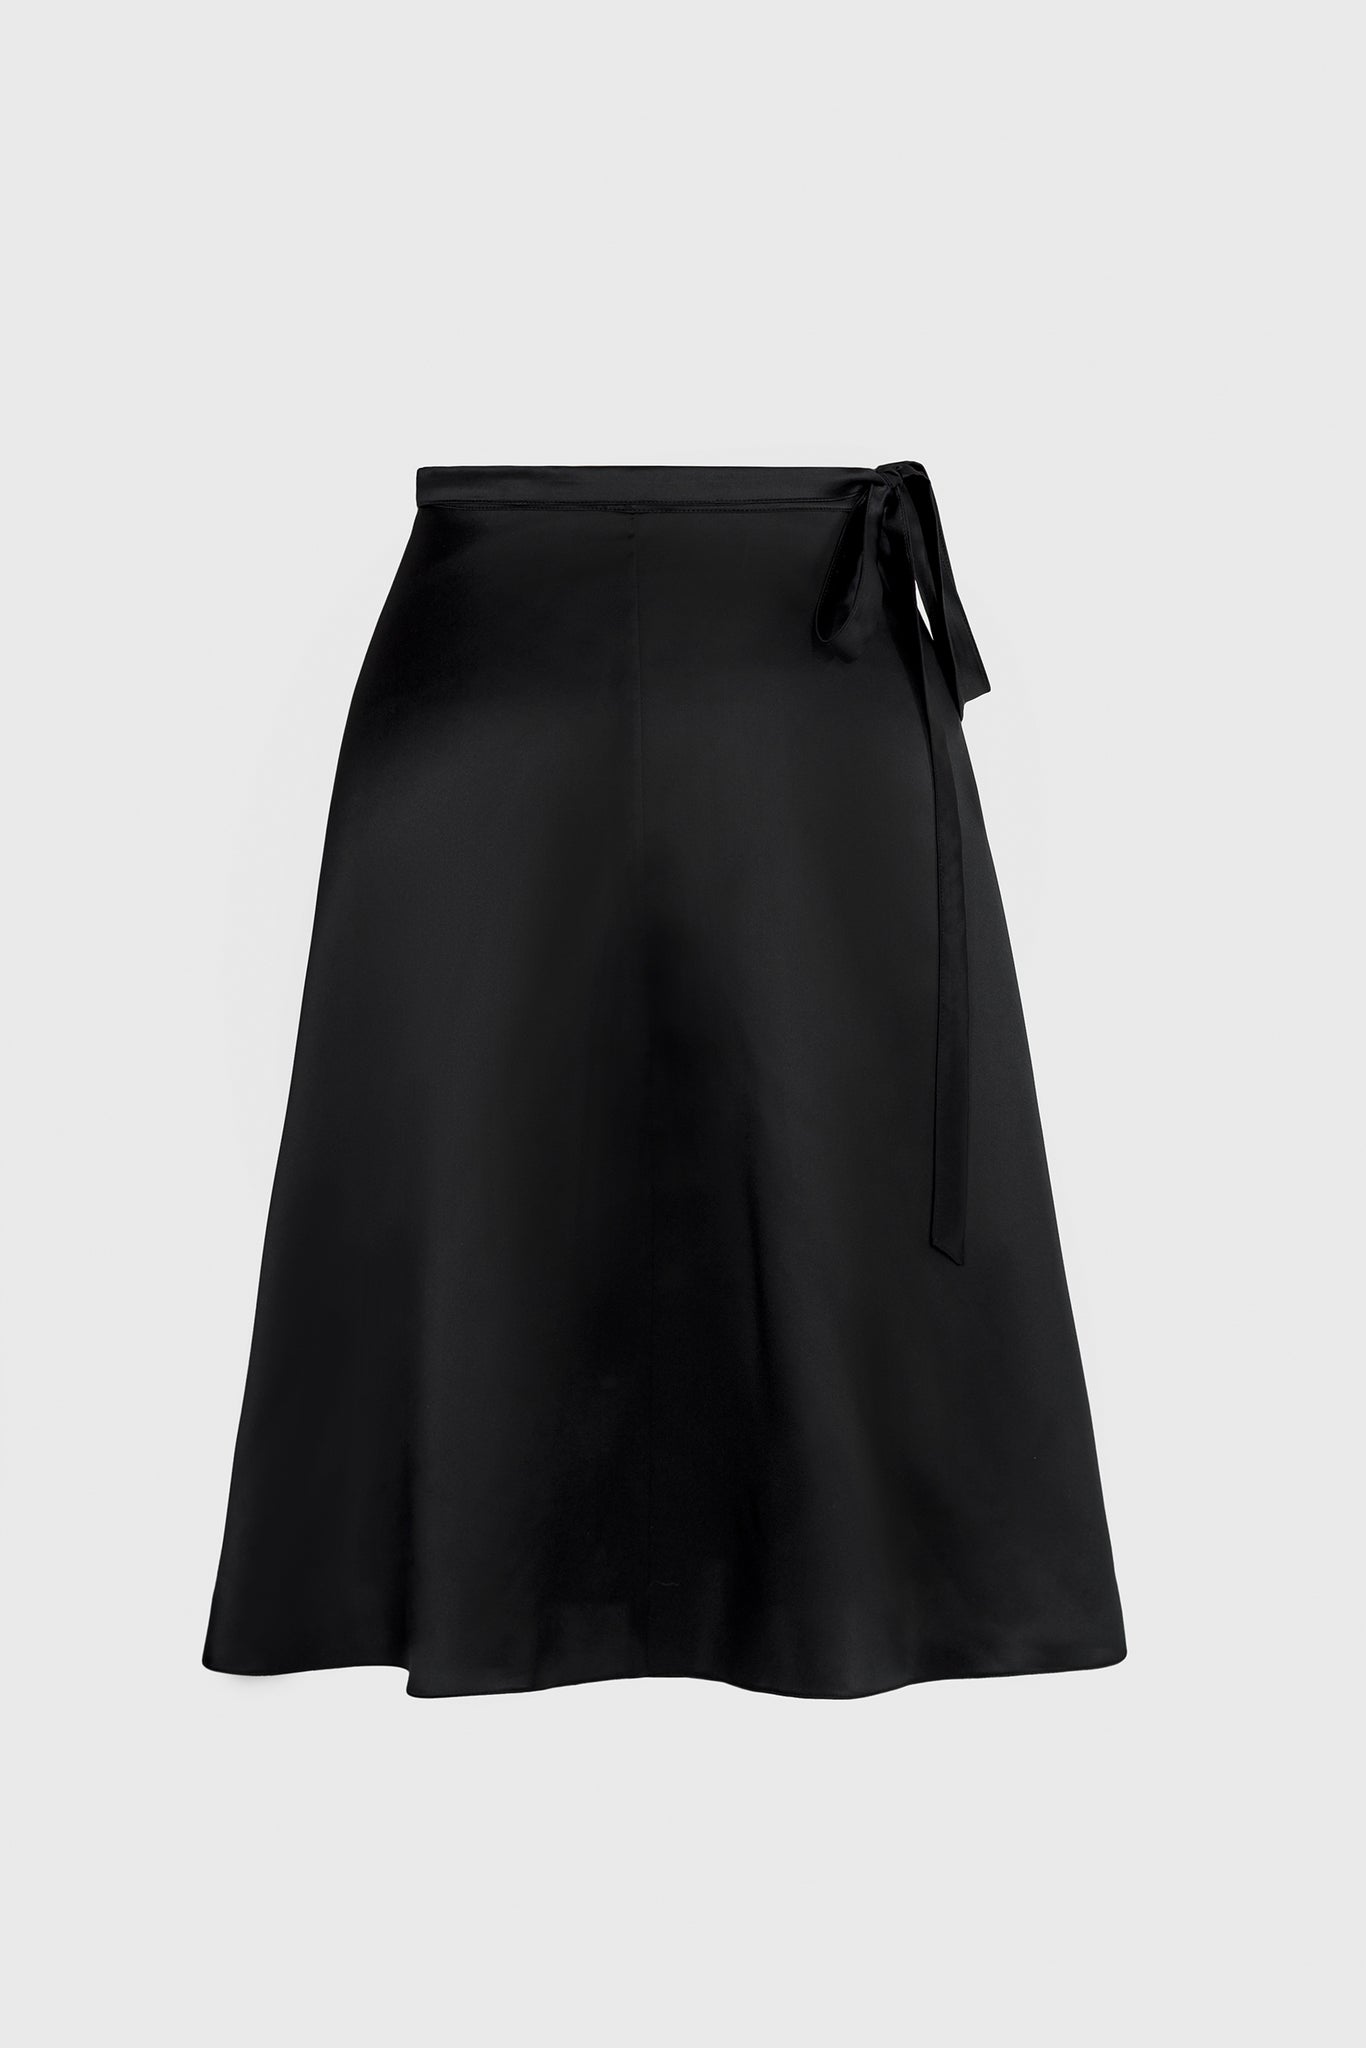 simple and timeless skirt, designed by Ruxandra, for young dancers, business women, all natural textile, sustainable, above the knee length, easy to wear with shirts and high heels or sneakers